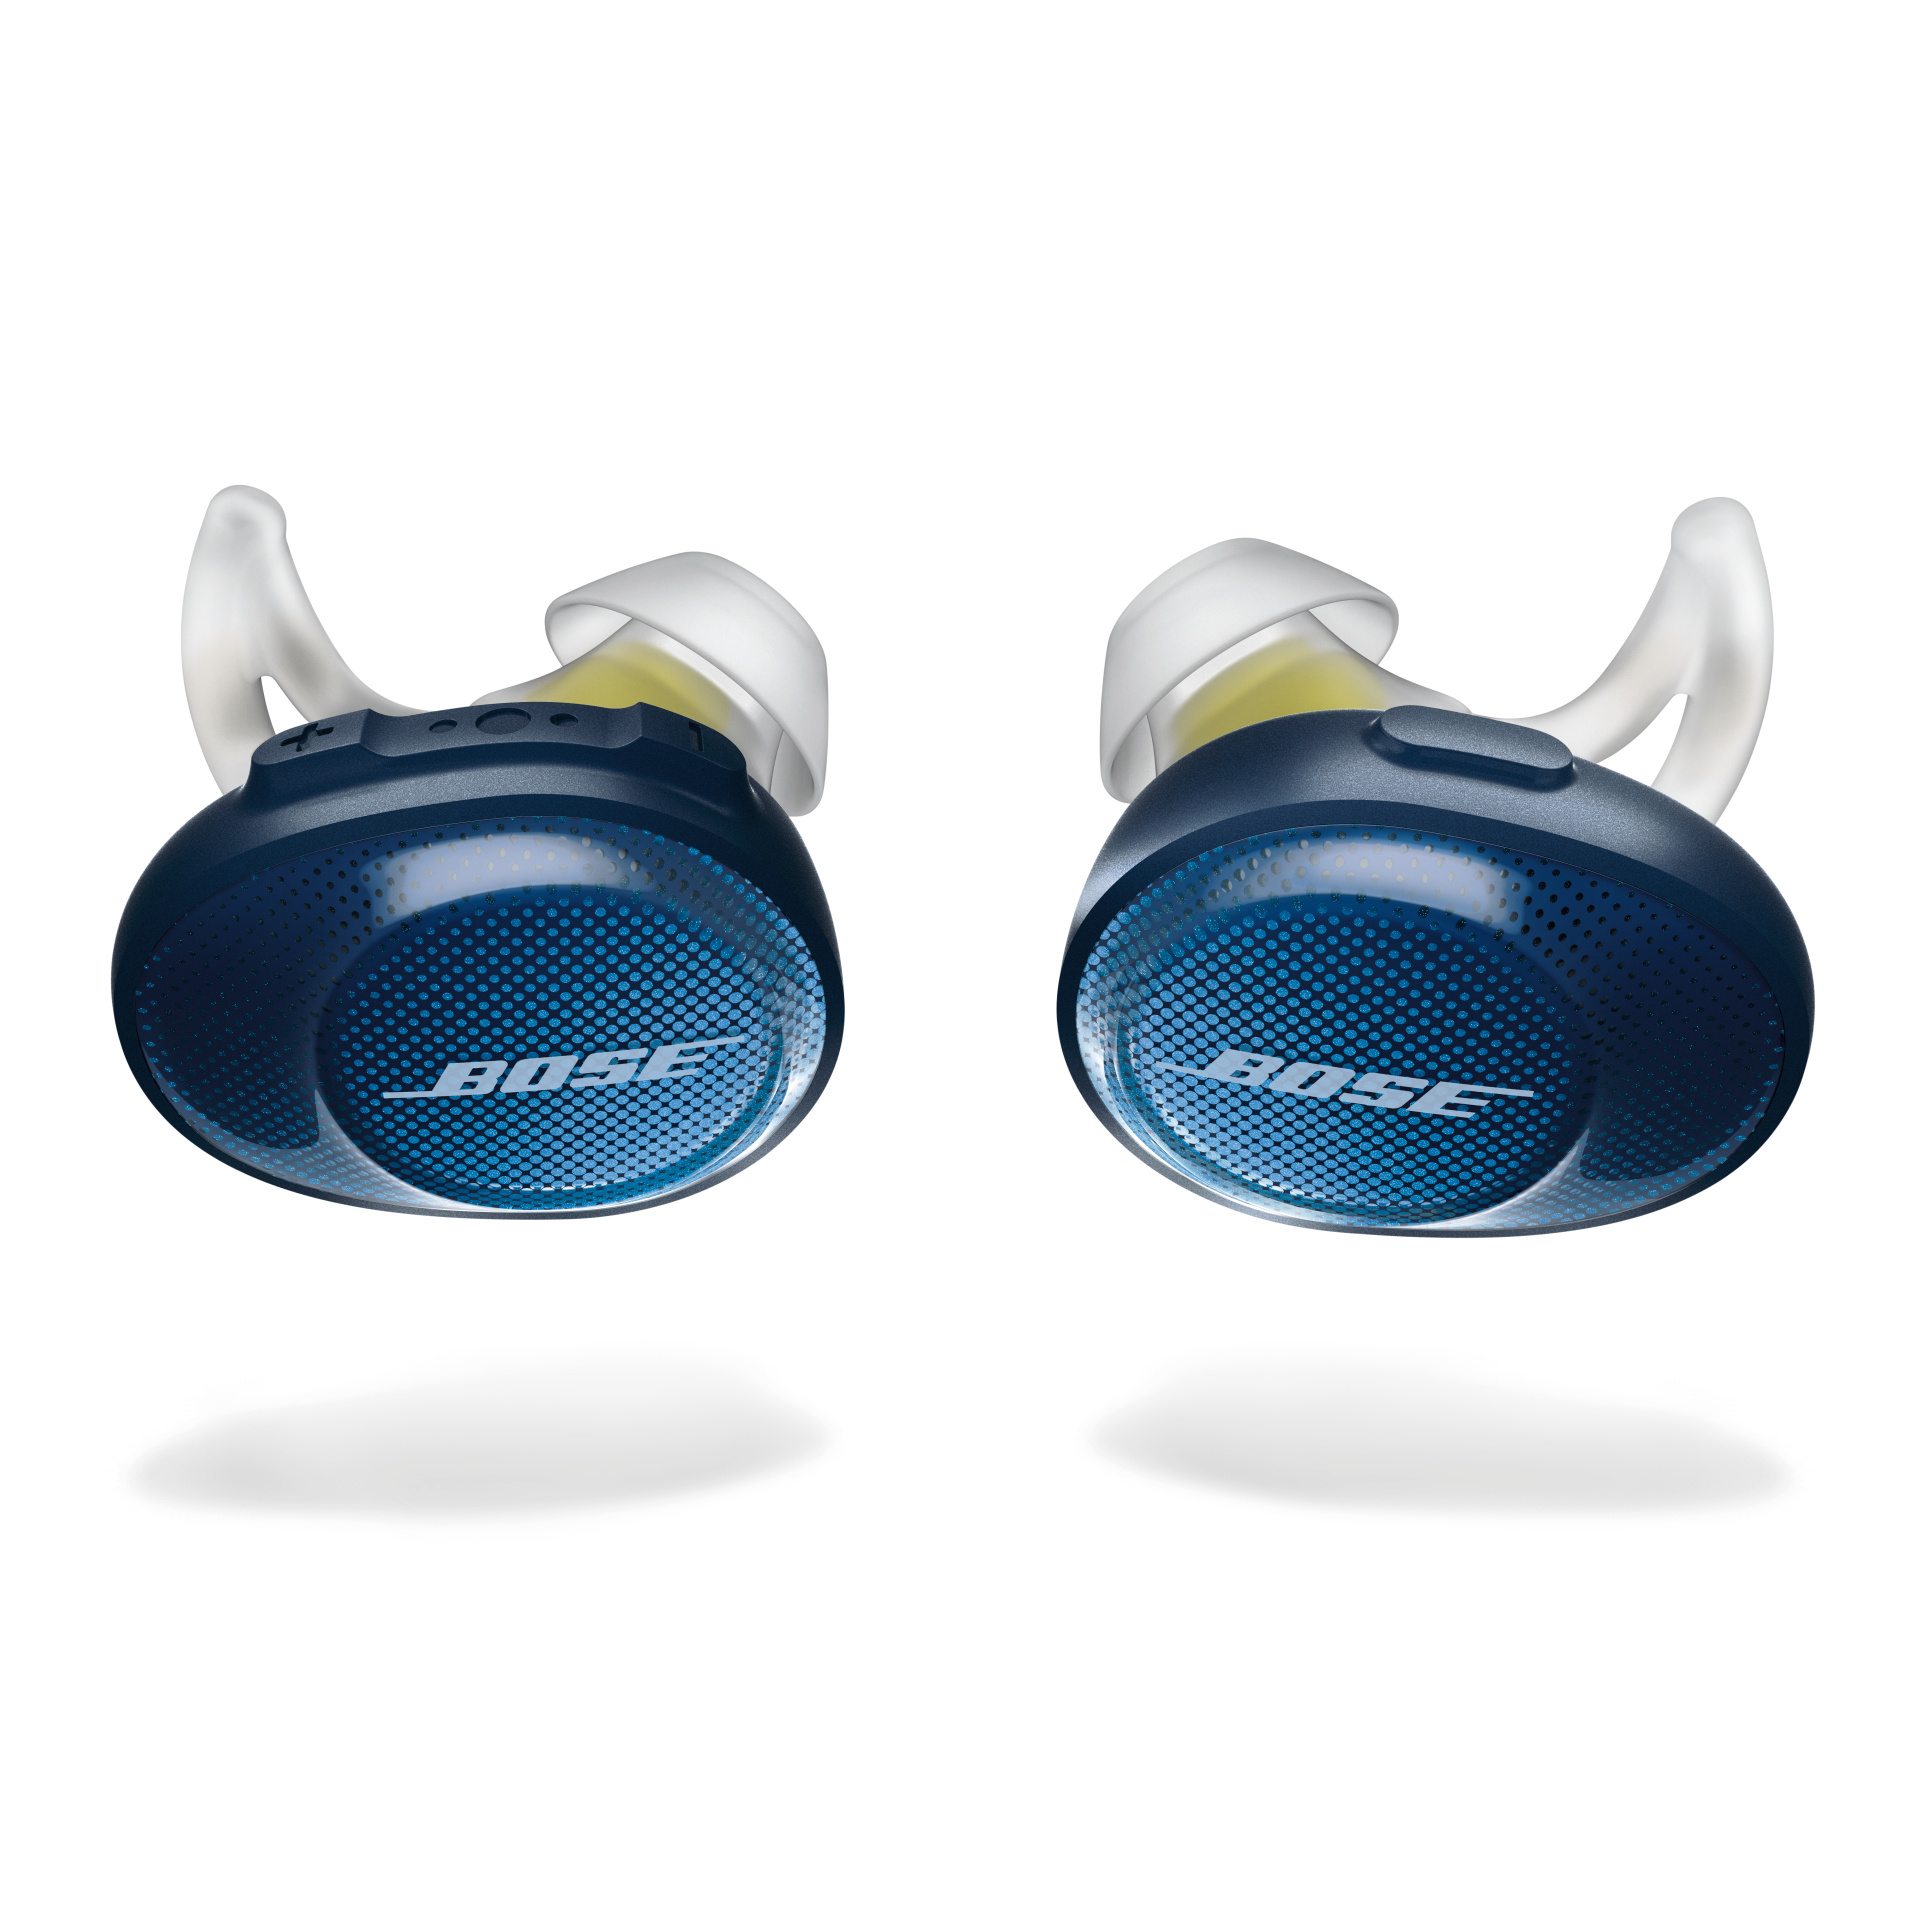 Bose SoundSport Bluetooth True Wireless Earbuds with Charging Case, Blue, SNDSPFREENVY - image 3 of 6